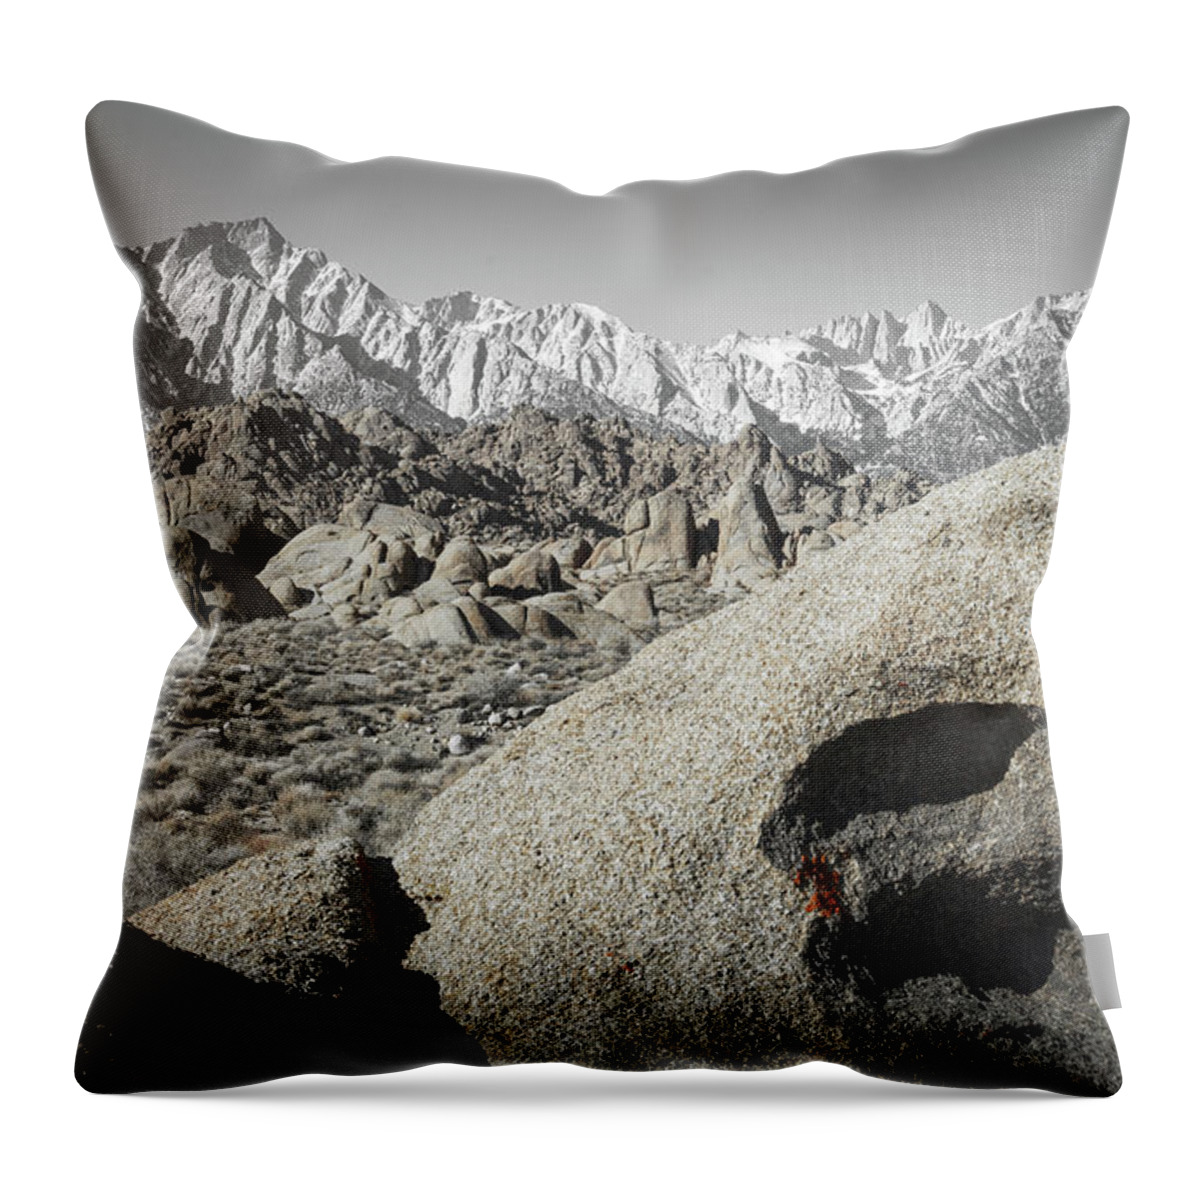 Alabama Hills Throw Pillow featuring the photograph Silver Sierra View 3 by Ryan Weddle